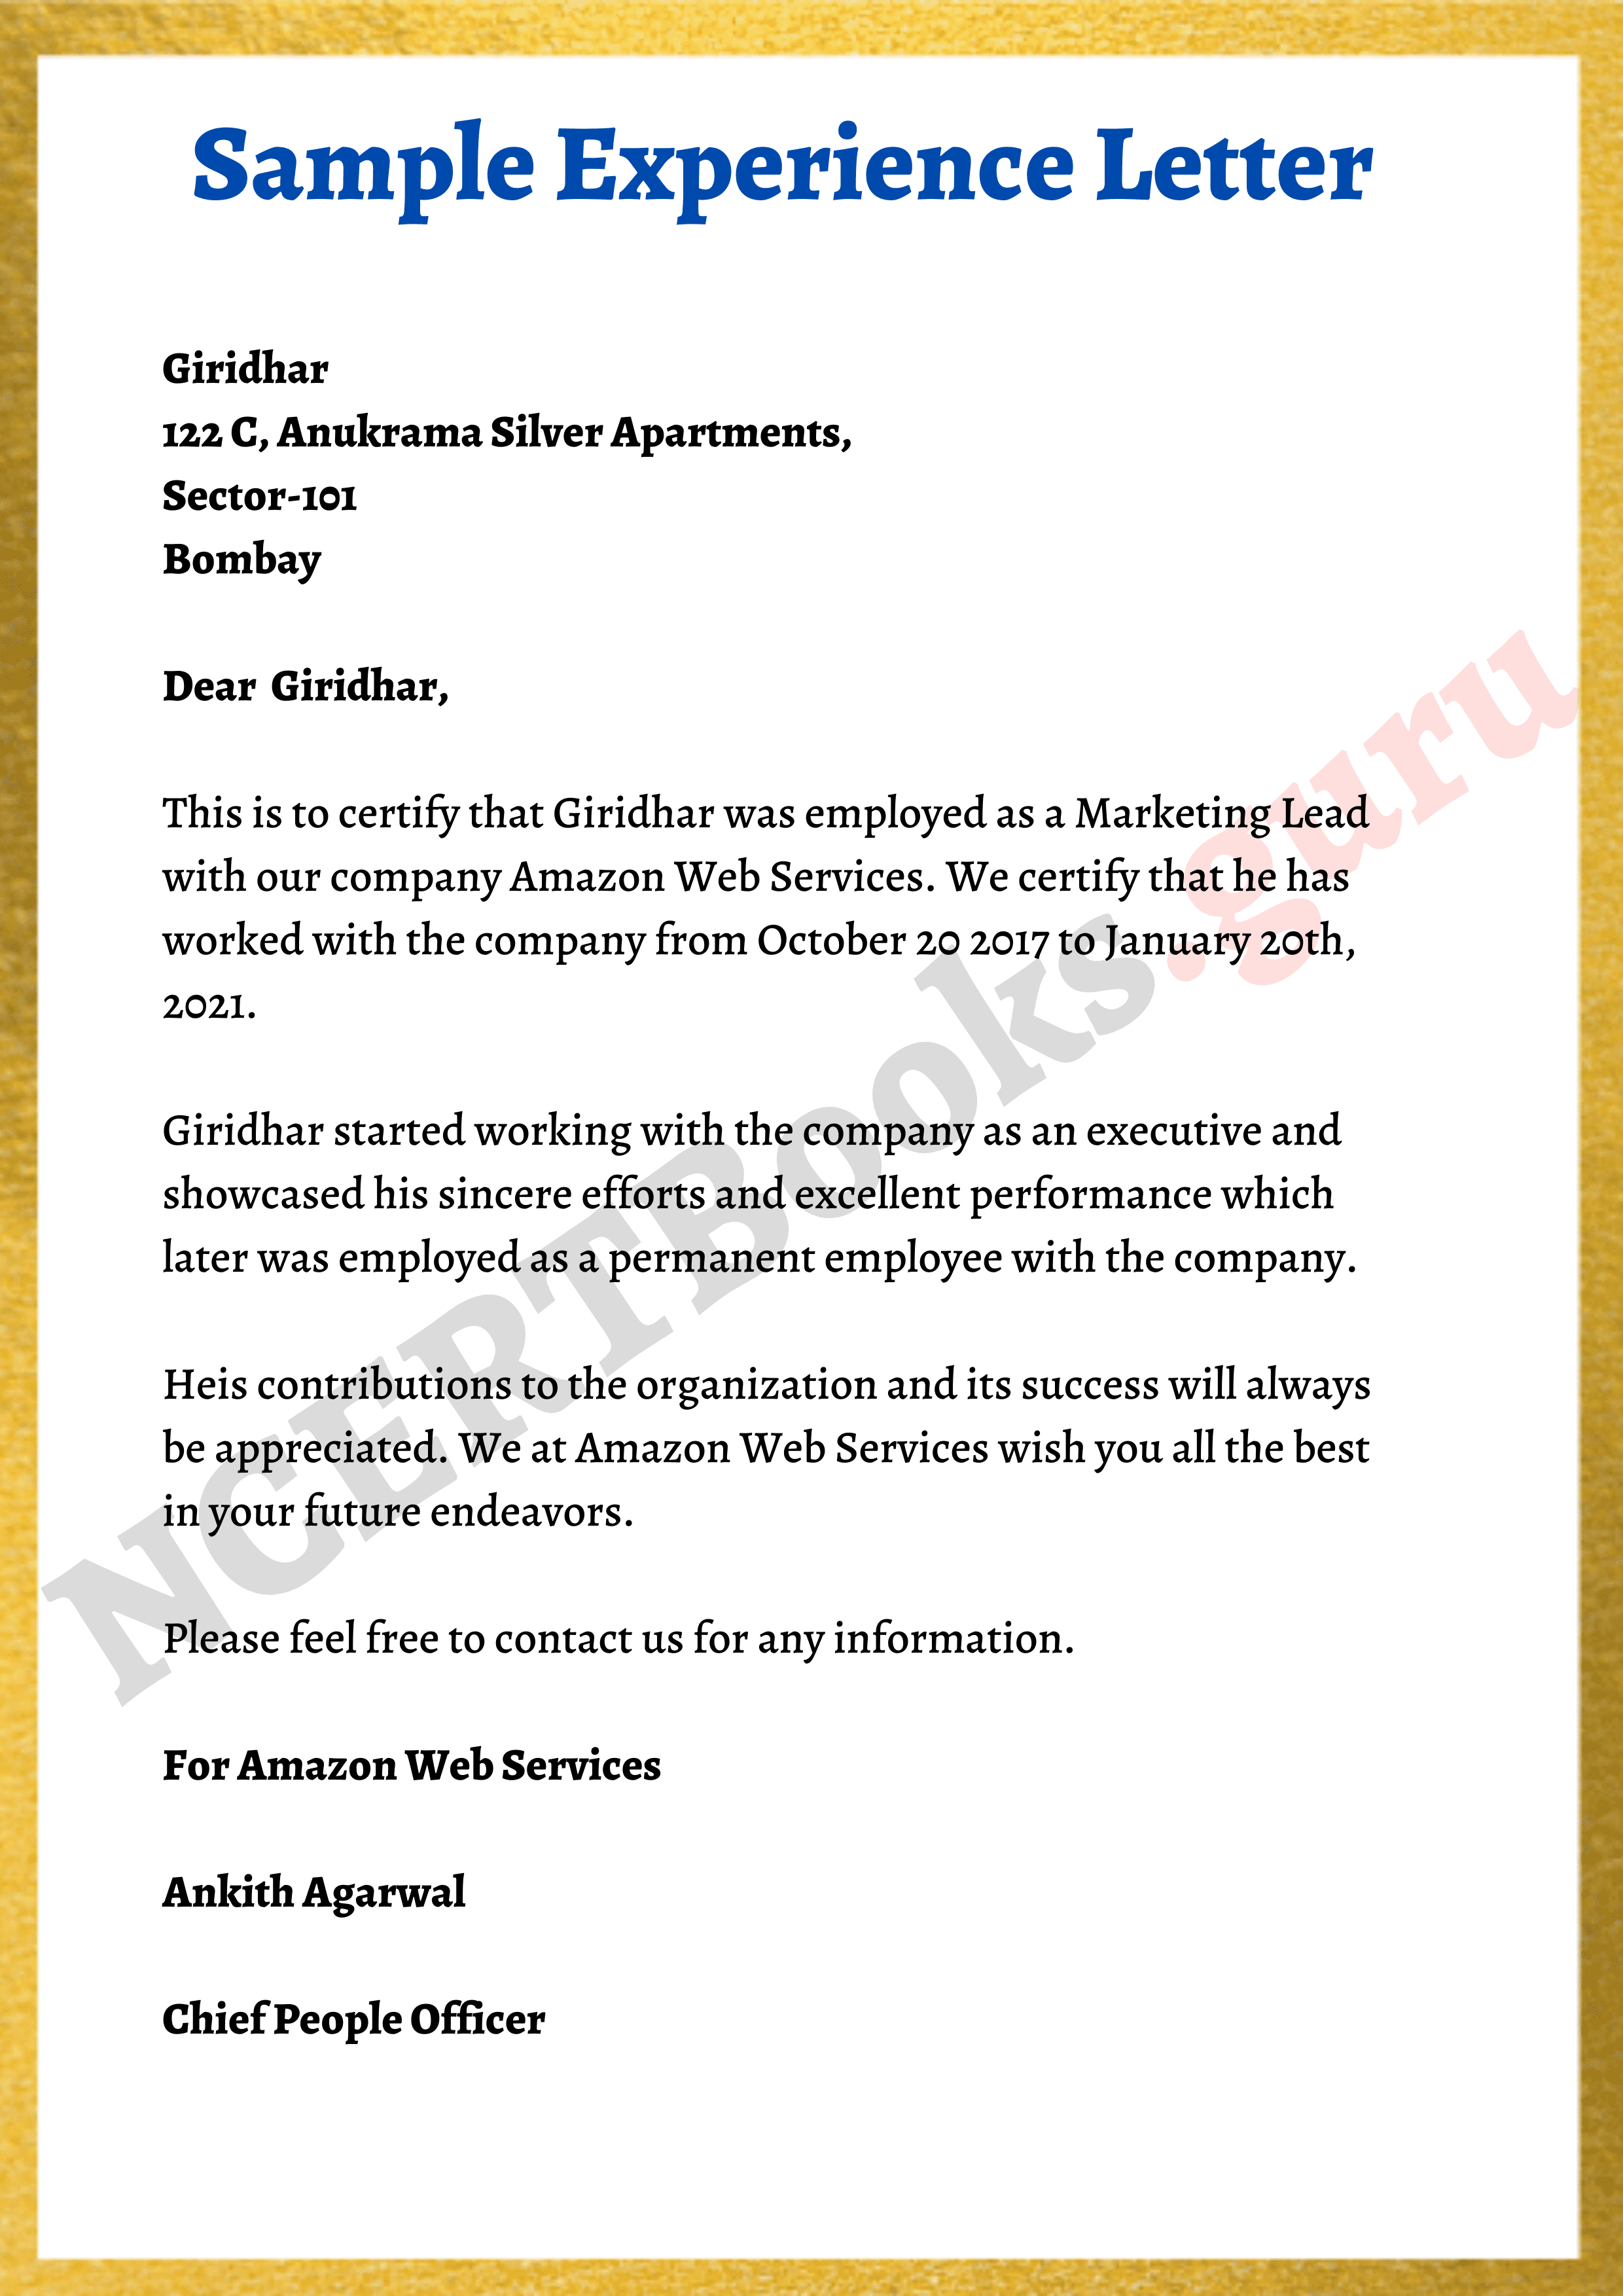 application letter sample with experience